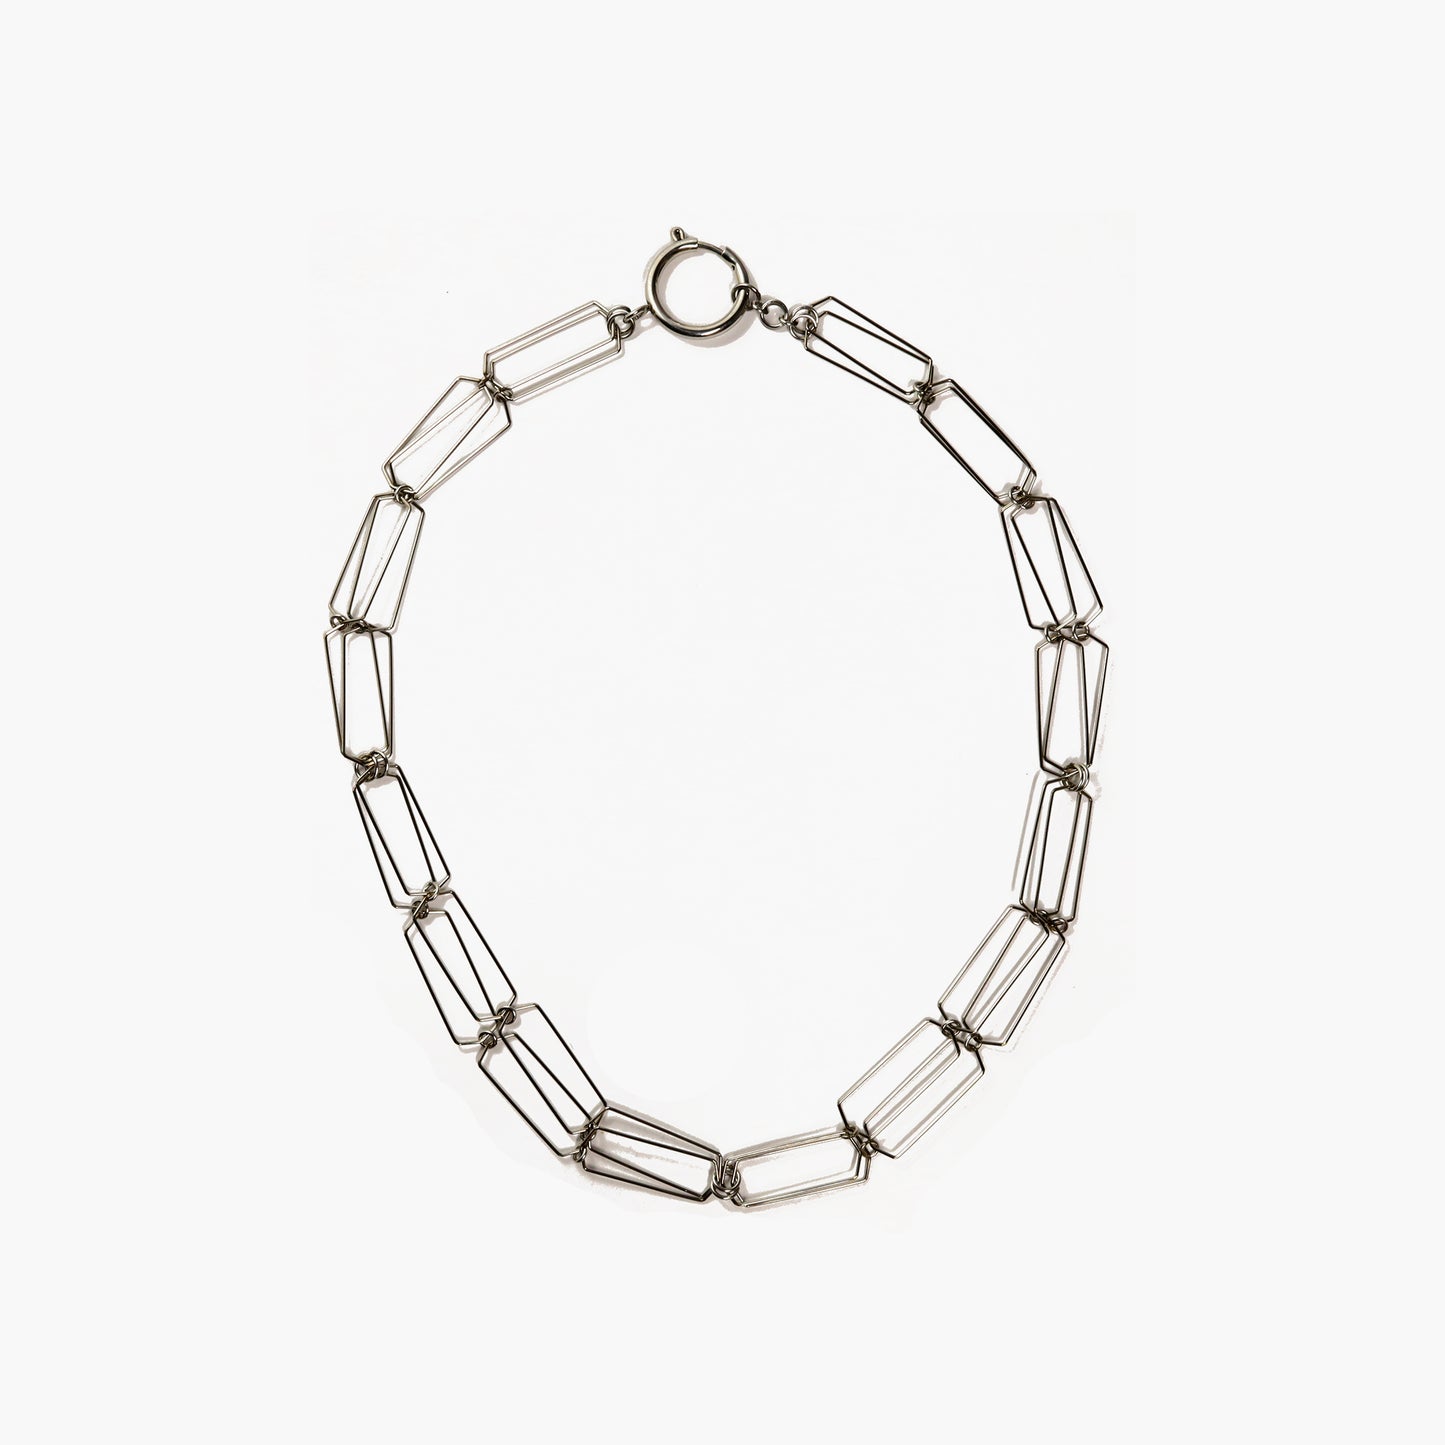 An image of a silver-colored necklace made of fine steel wire. The necklace is a delicate chain composed of open links of steel wire. It has a smooth, shiny surface and catches the light in various angles. The necklace features a simple and elegant oversized clasp. The clasp is an oversize spring ring with a smooth and reflective surface that complements the necklace's overall aesthetic.